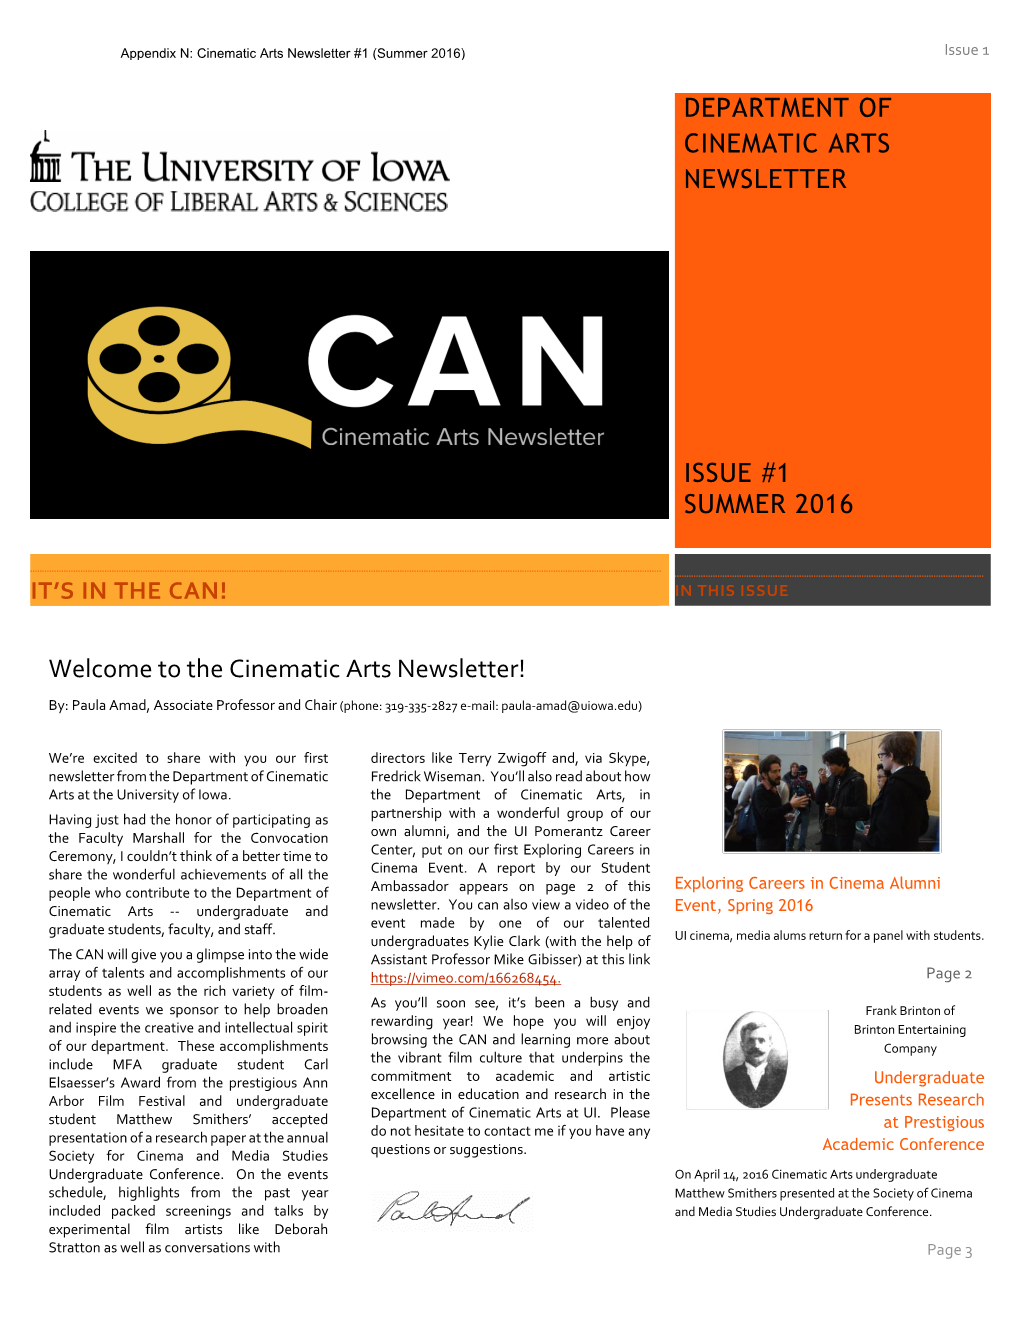 Department of Cinematic Arts Newsletter Issue #1 Summer 2016